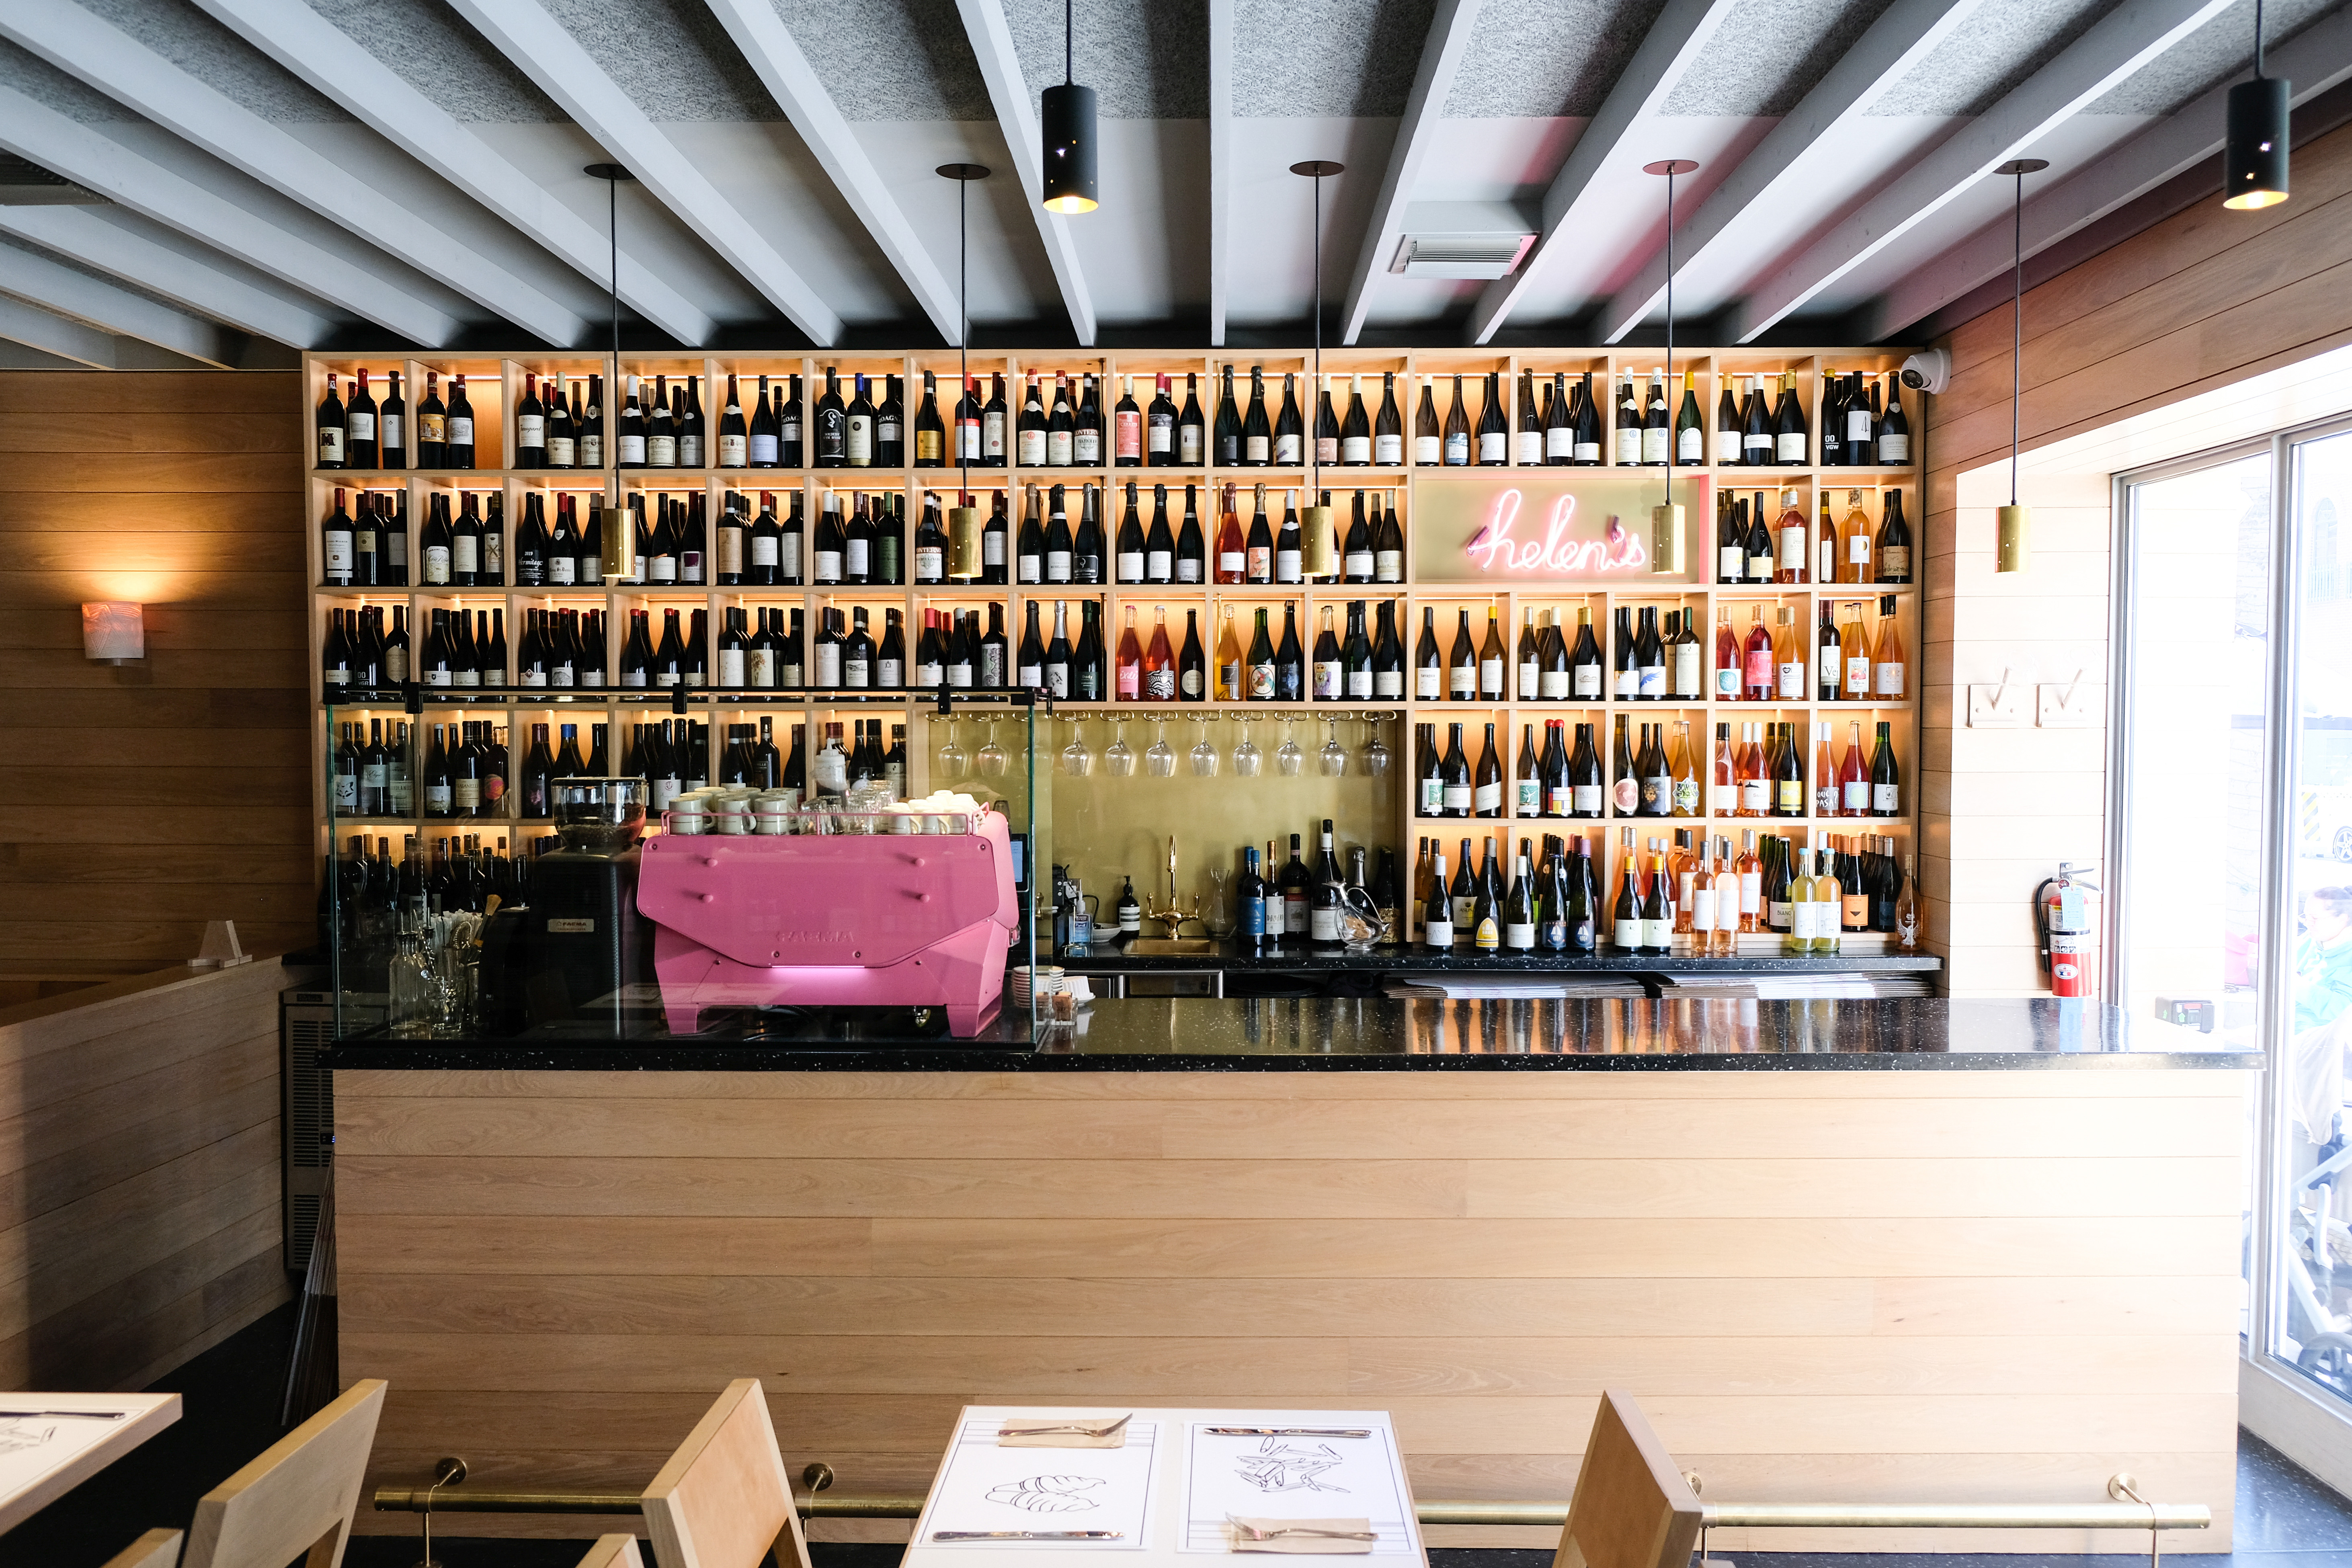 A light wooden bar with rows of wine bottles behind it.